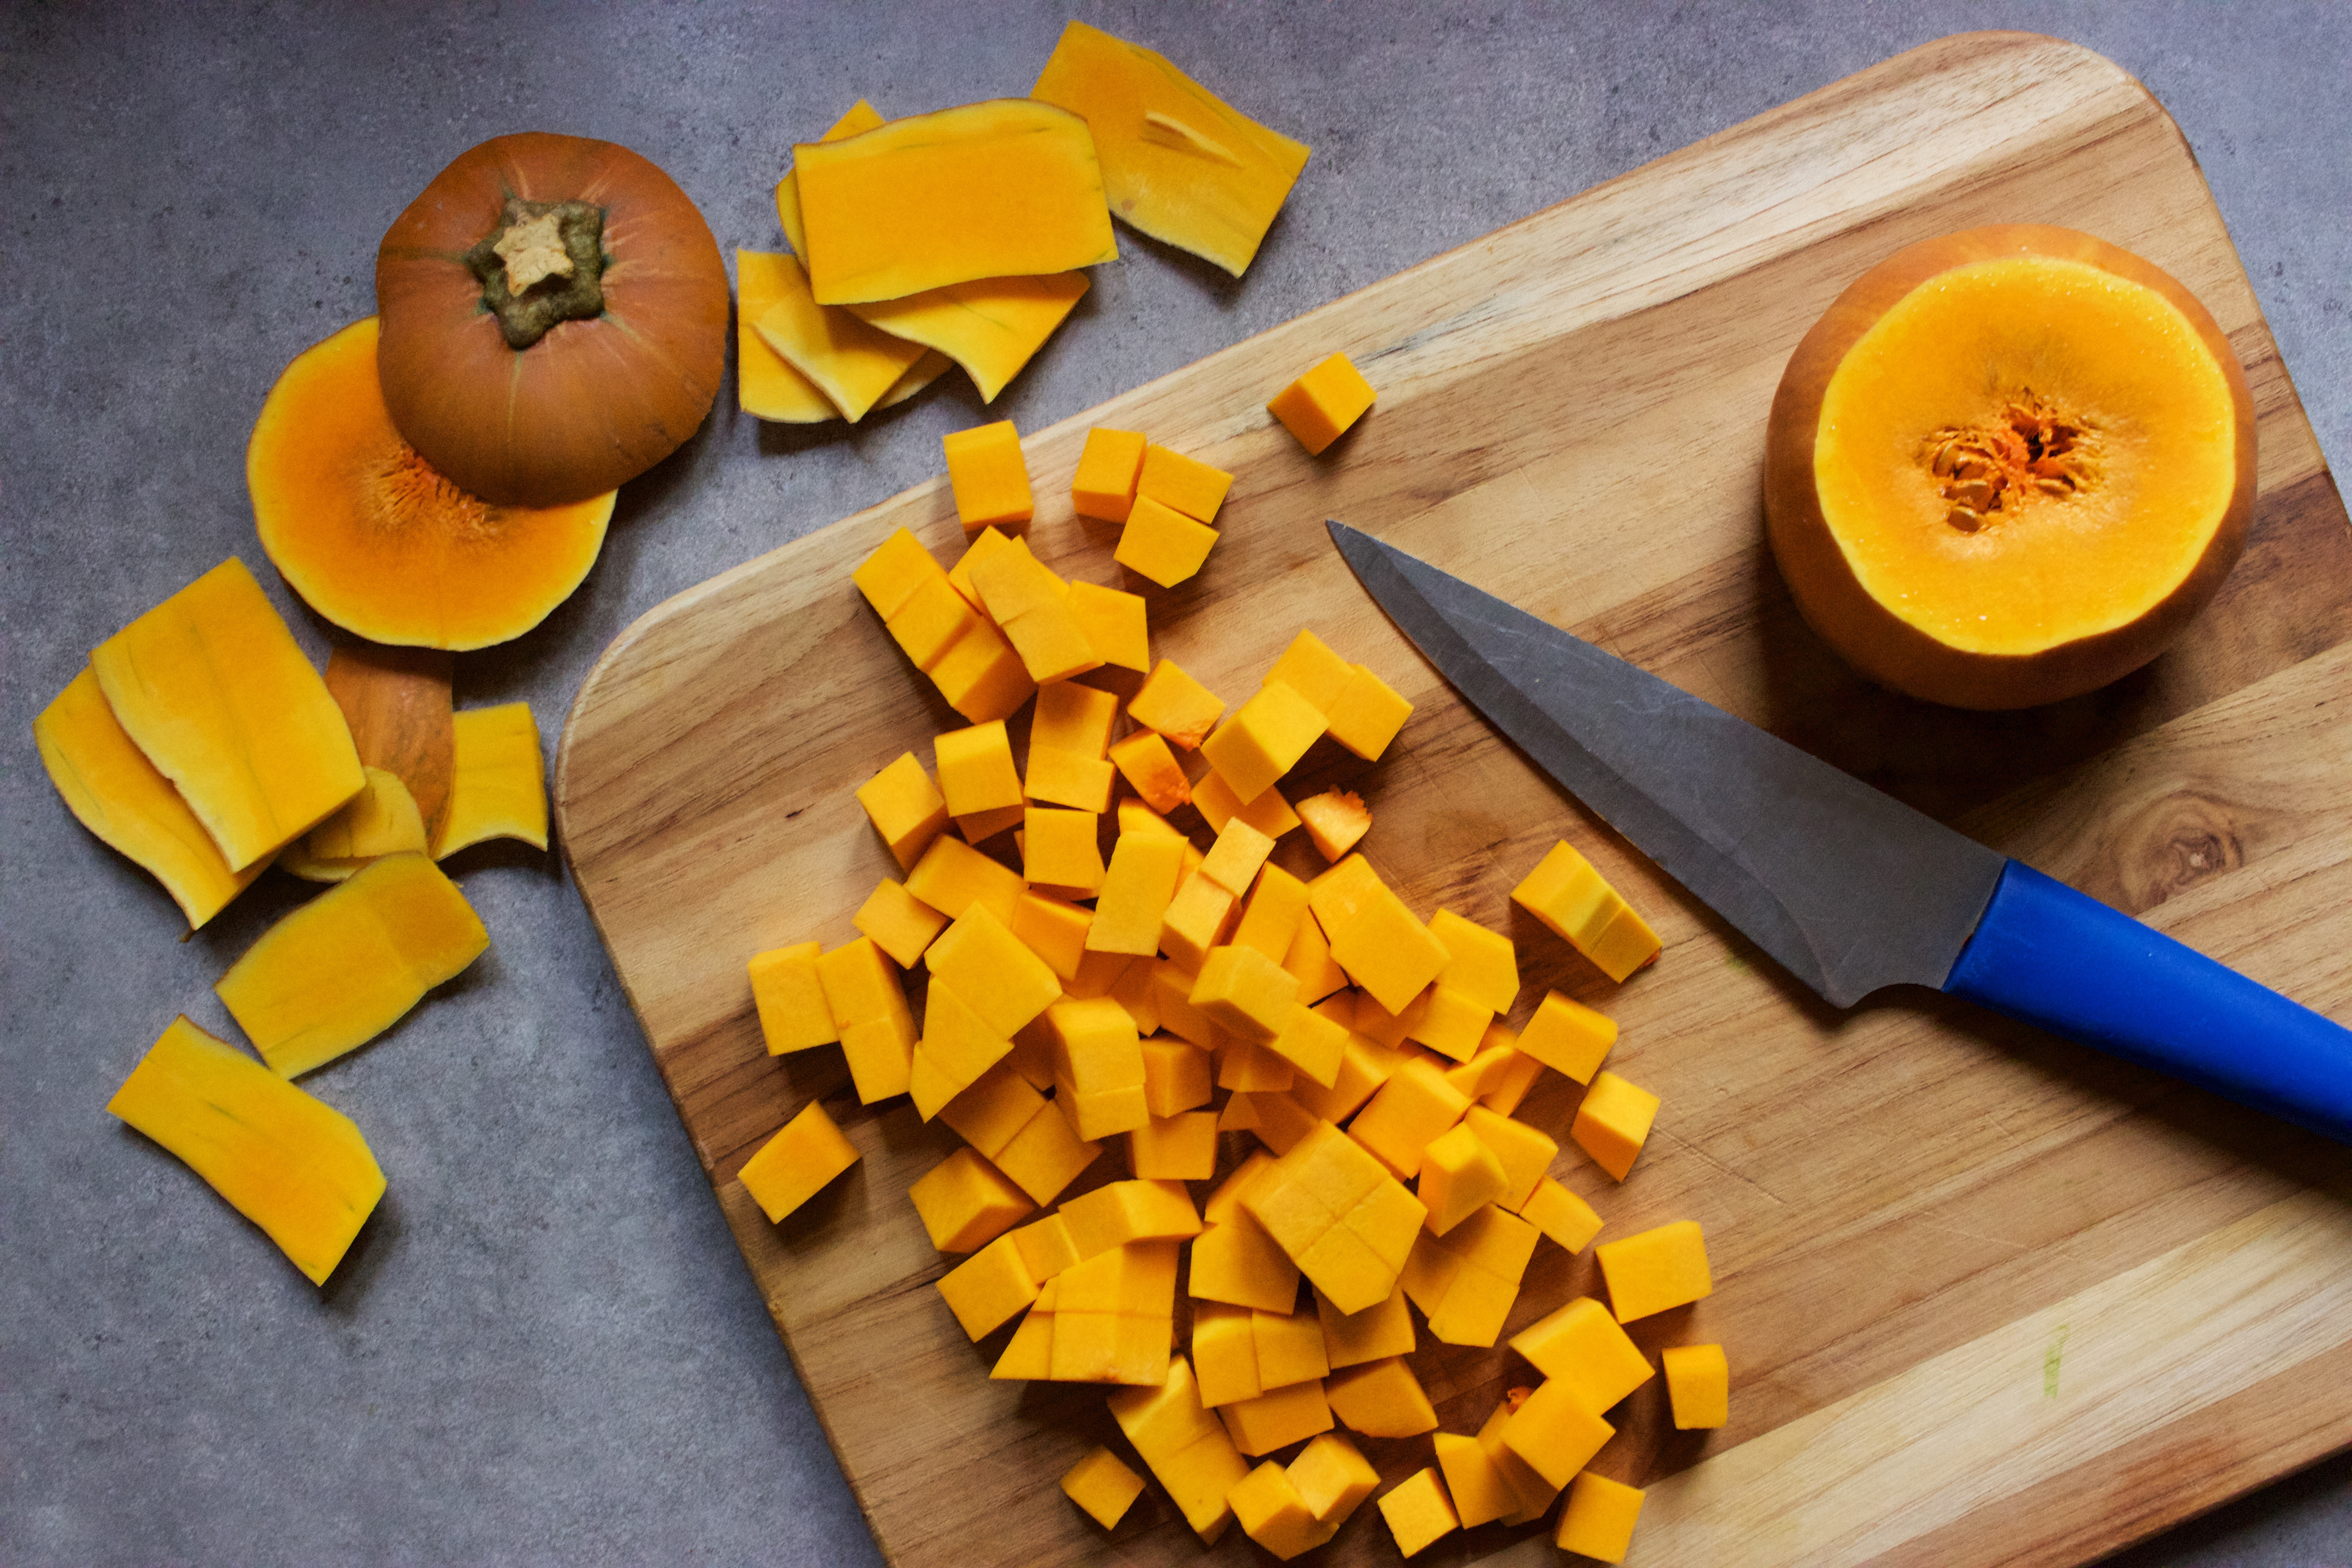 Chopping butternut squash into cubes on a wooden cutting board